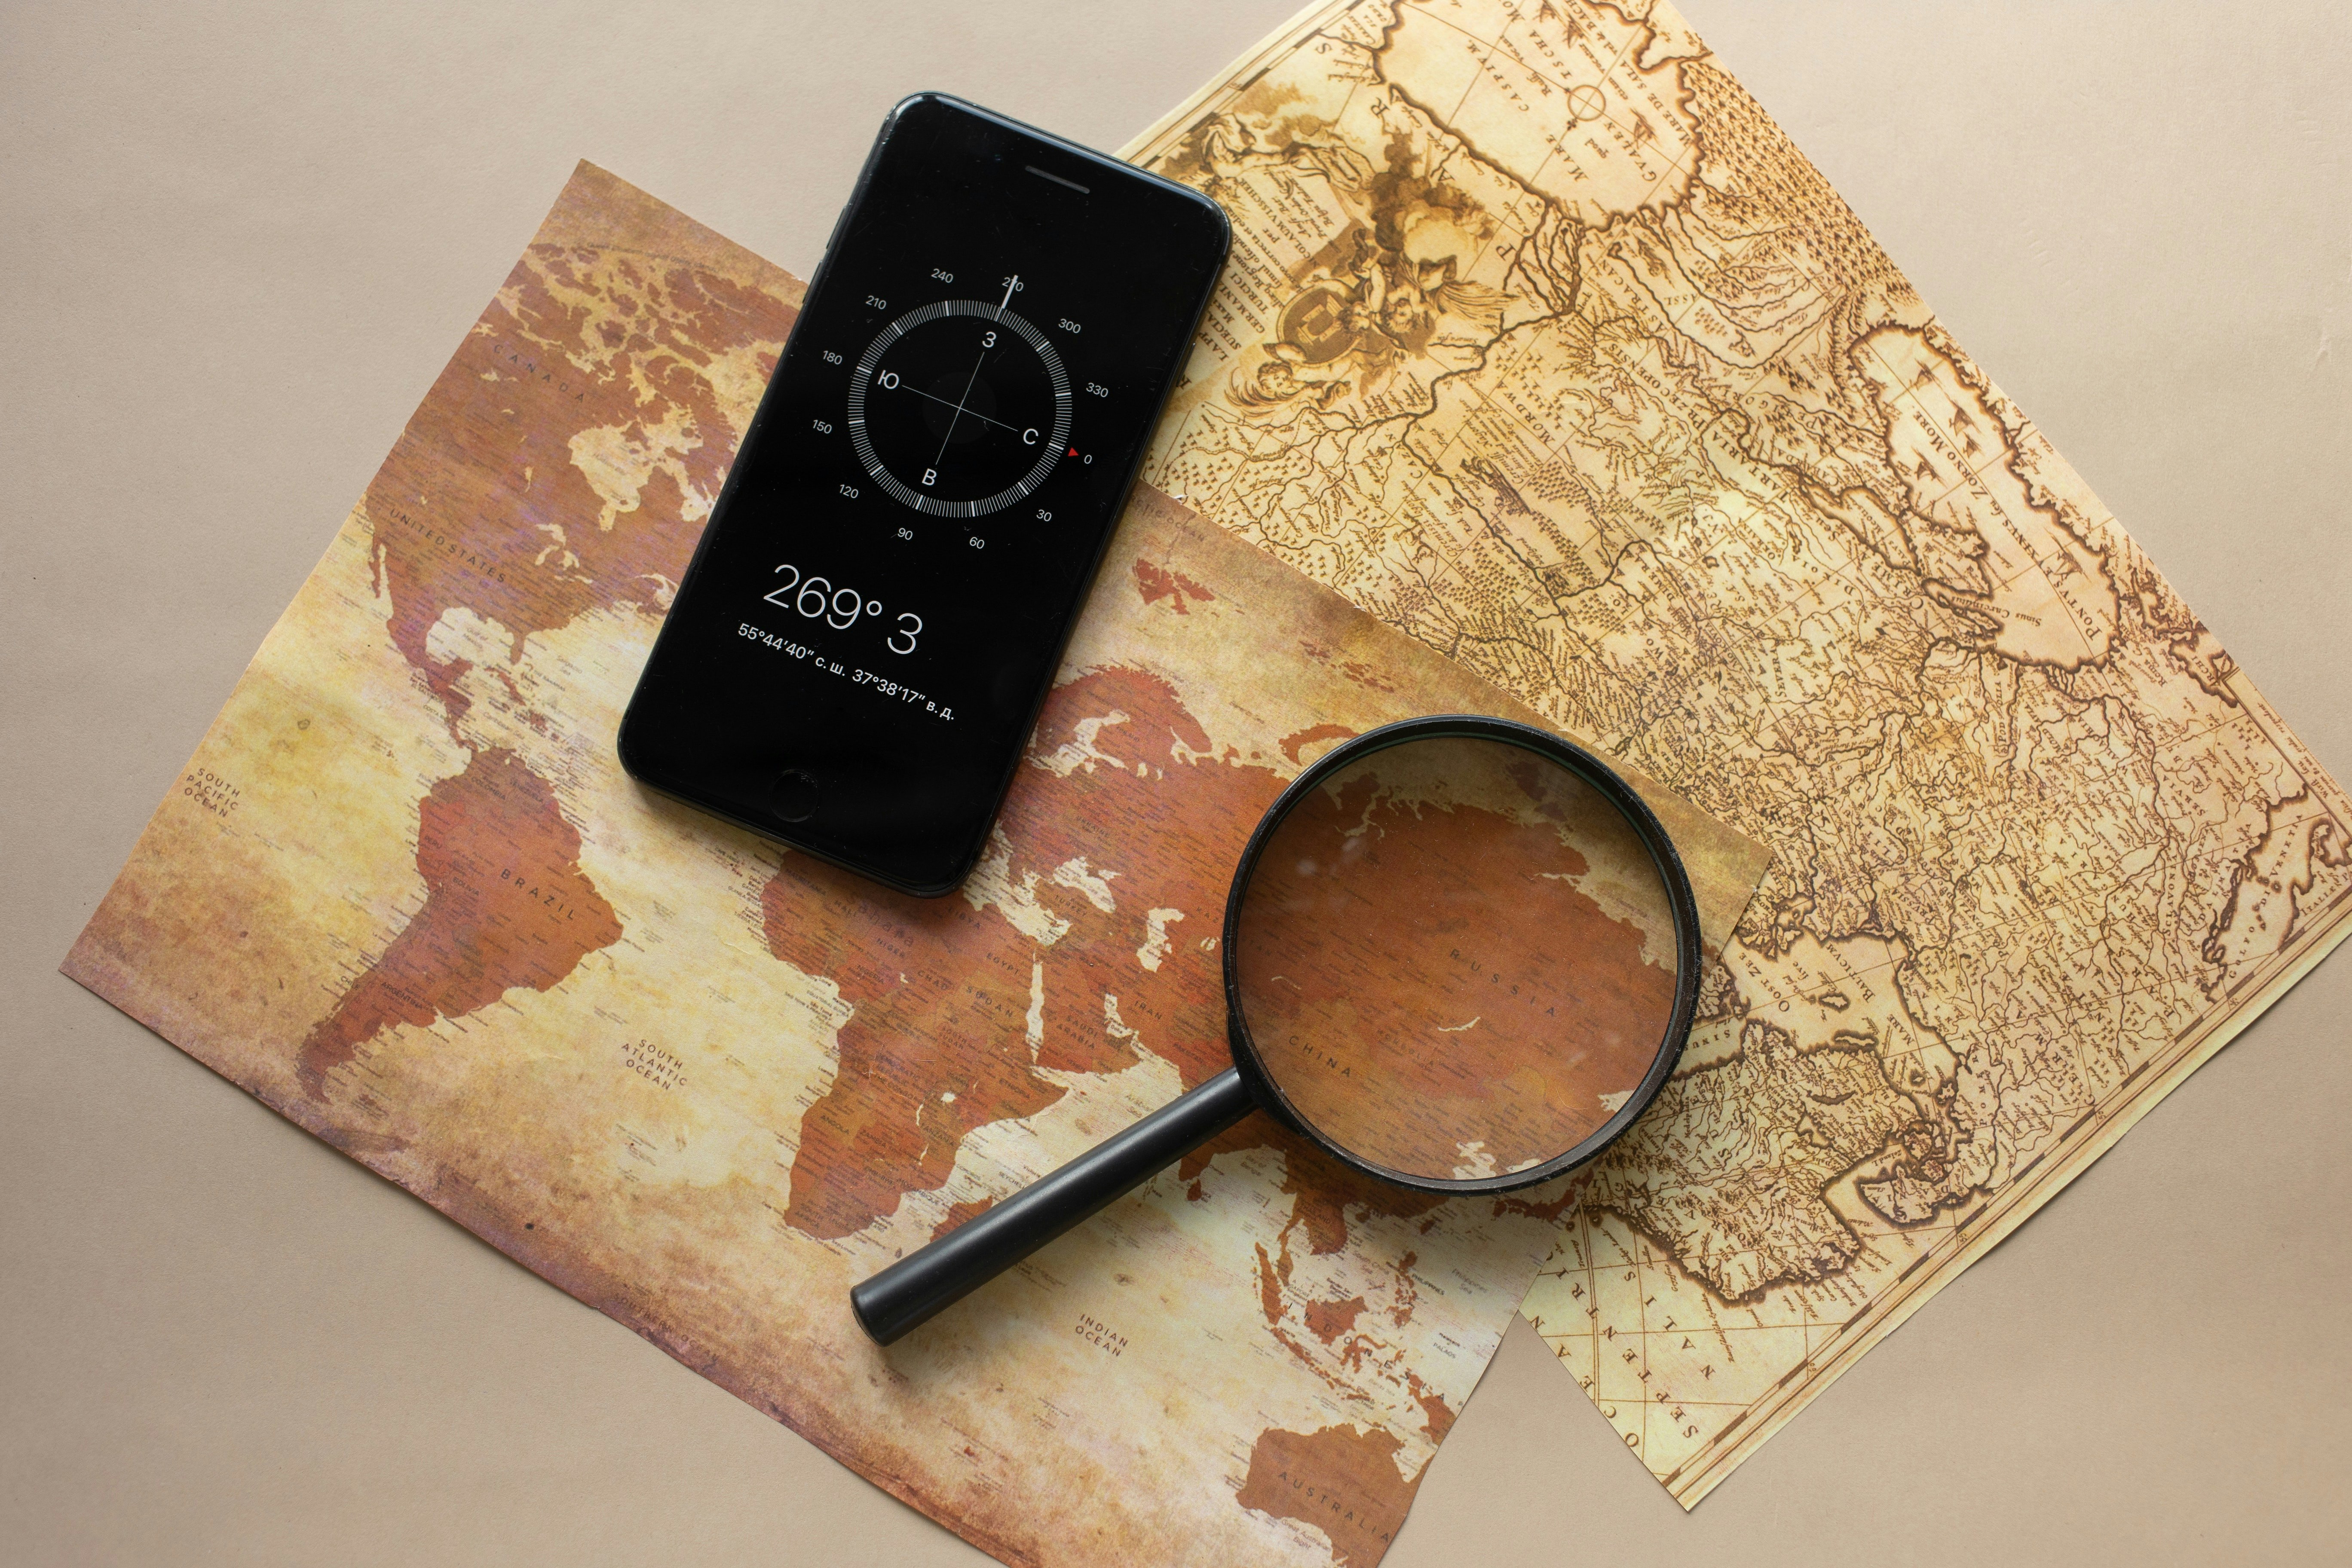 Compass and maps